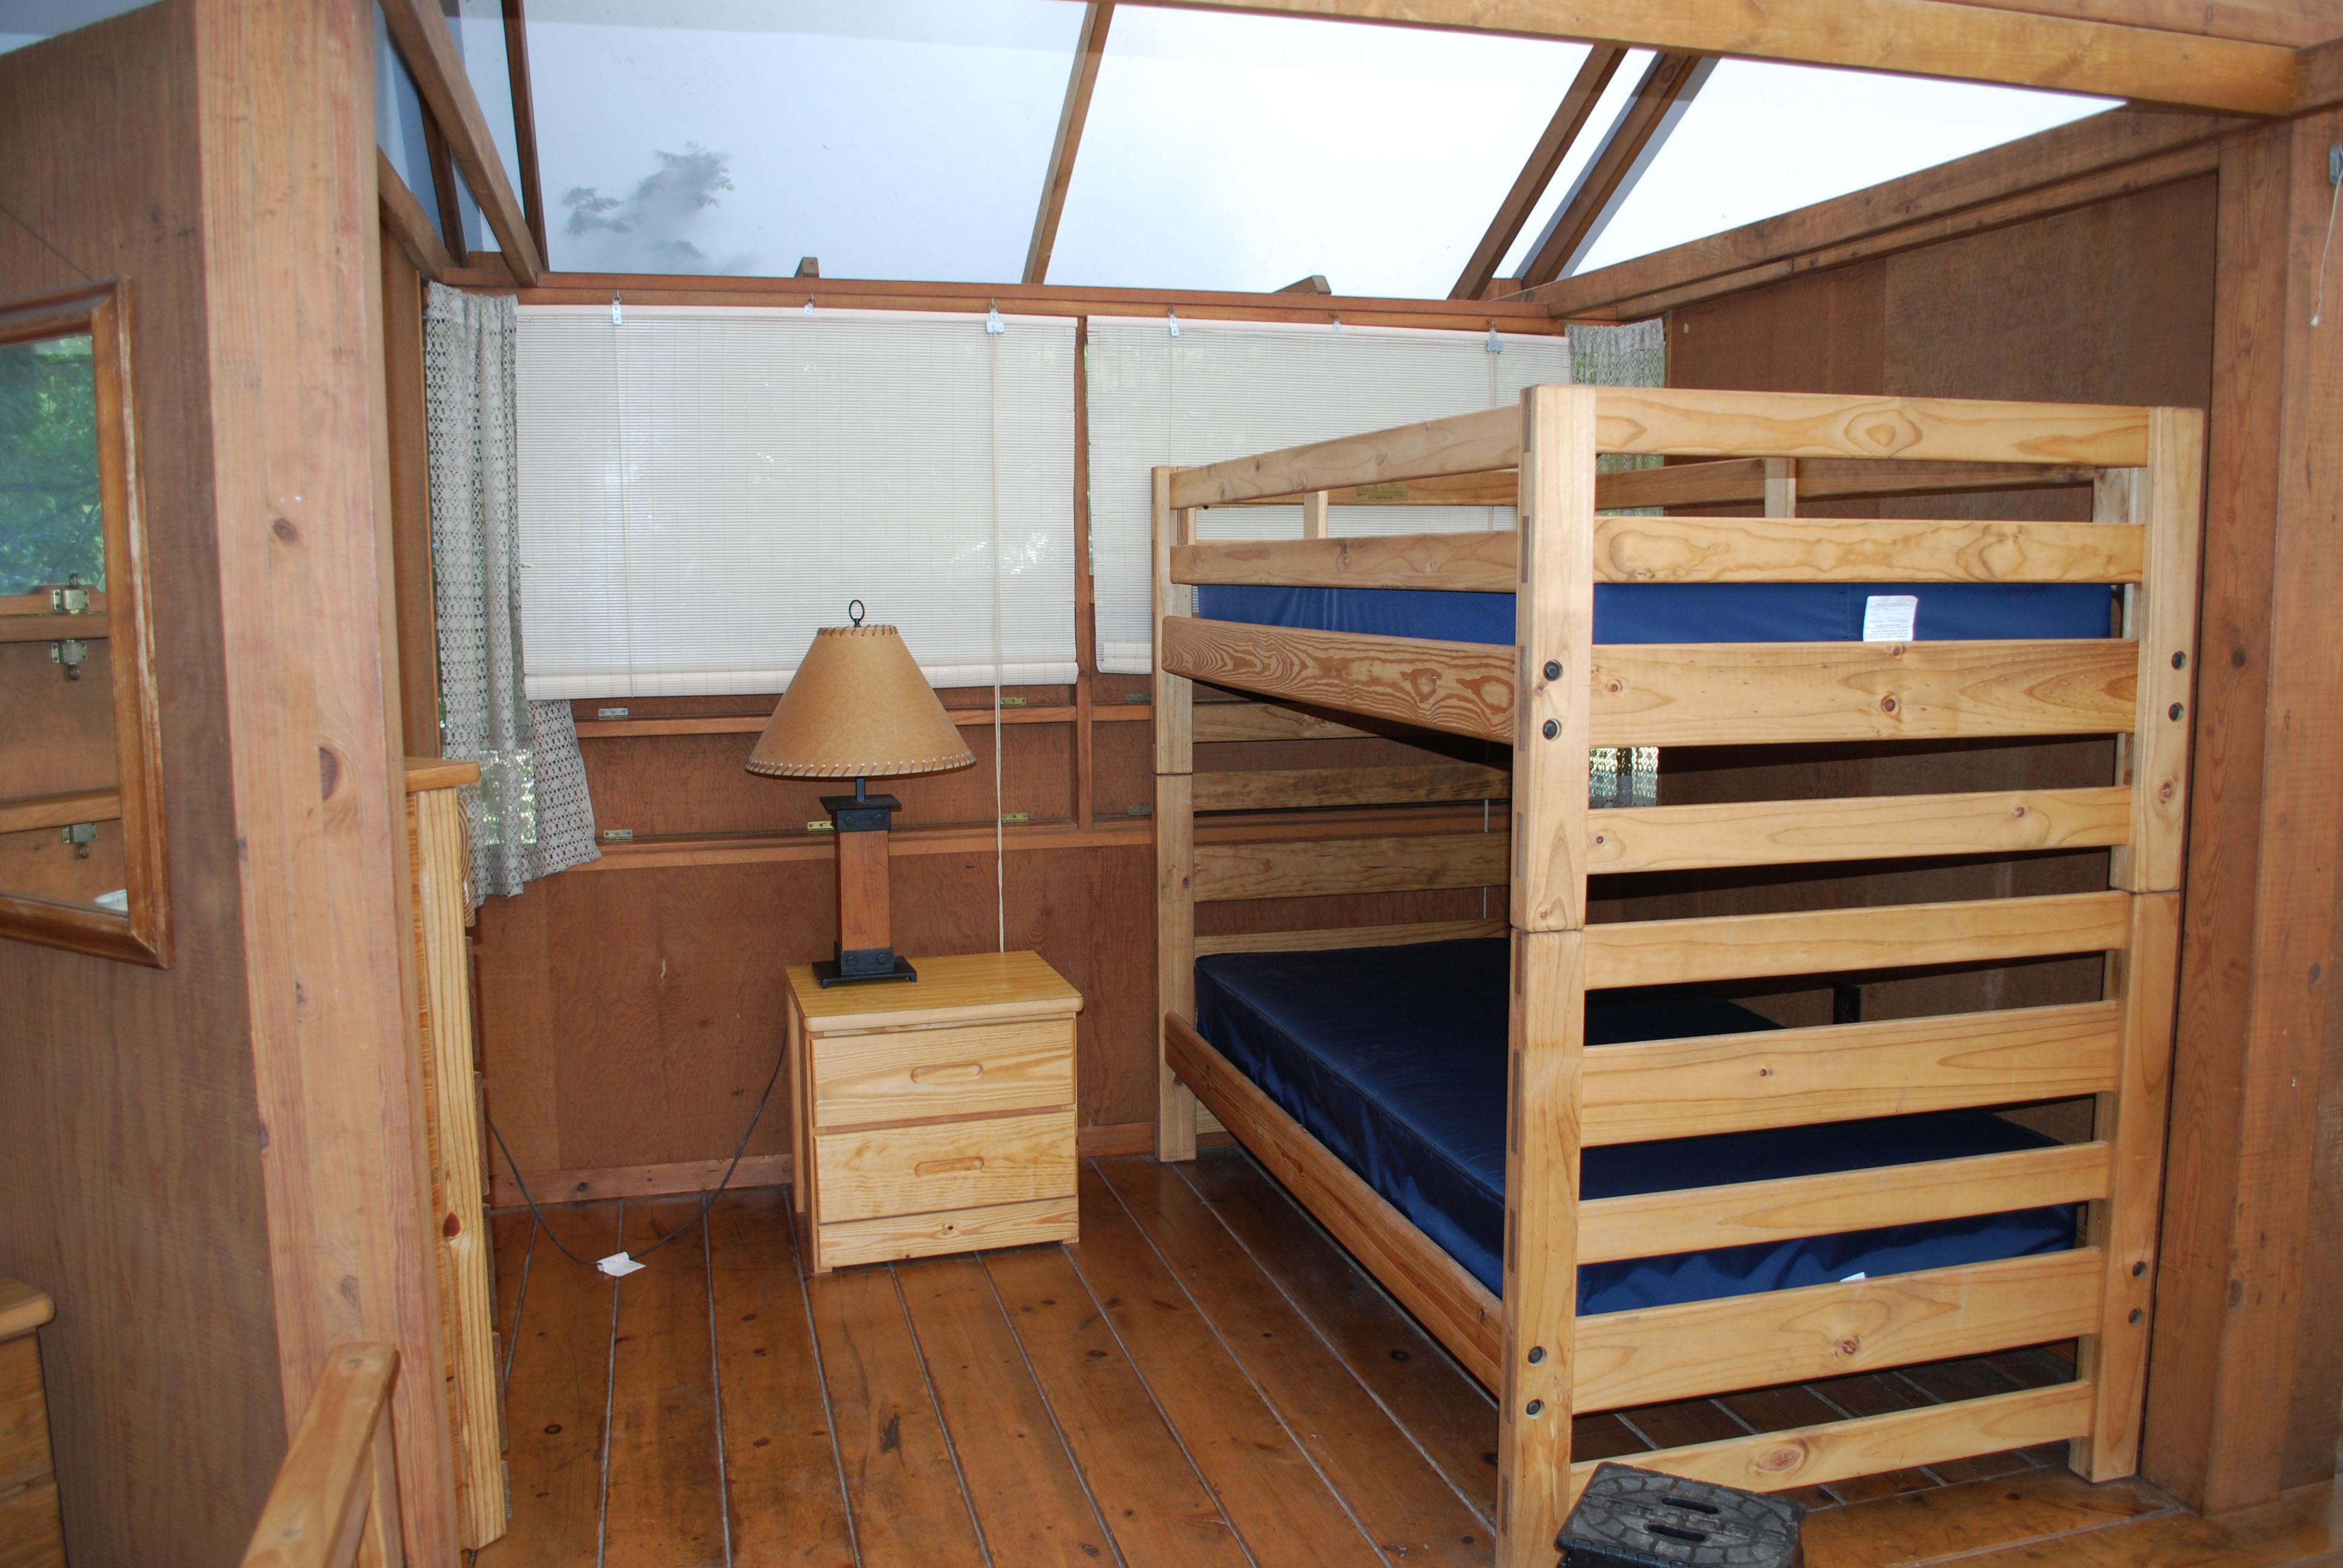 Cabent interior with bunkbeds